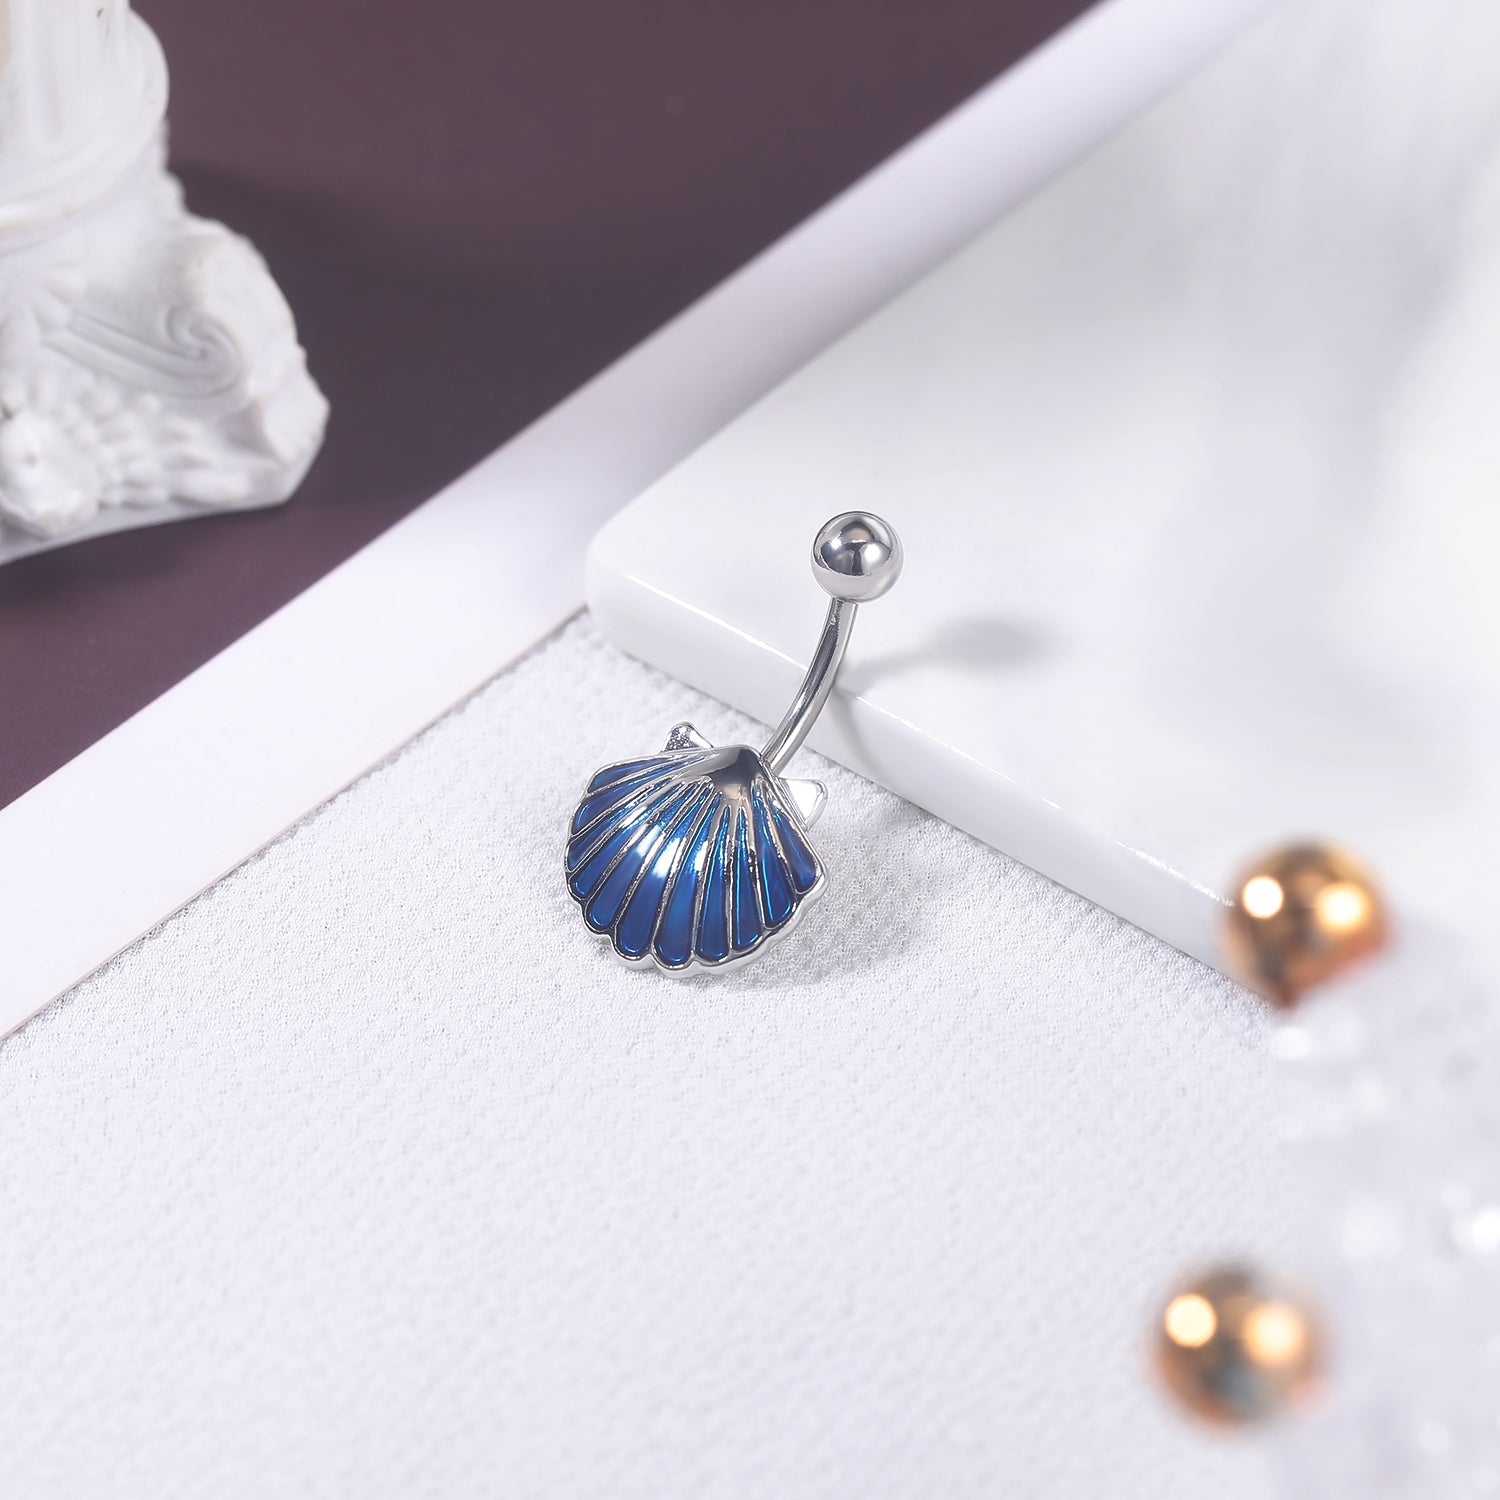 14g-blue-white-shall-belly-button-rings-alloy-pendant-belly-navel-piercing